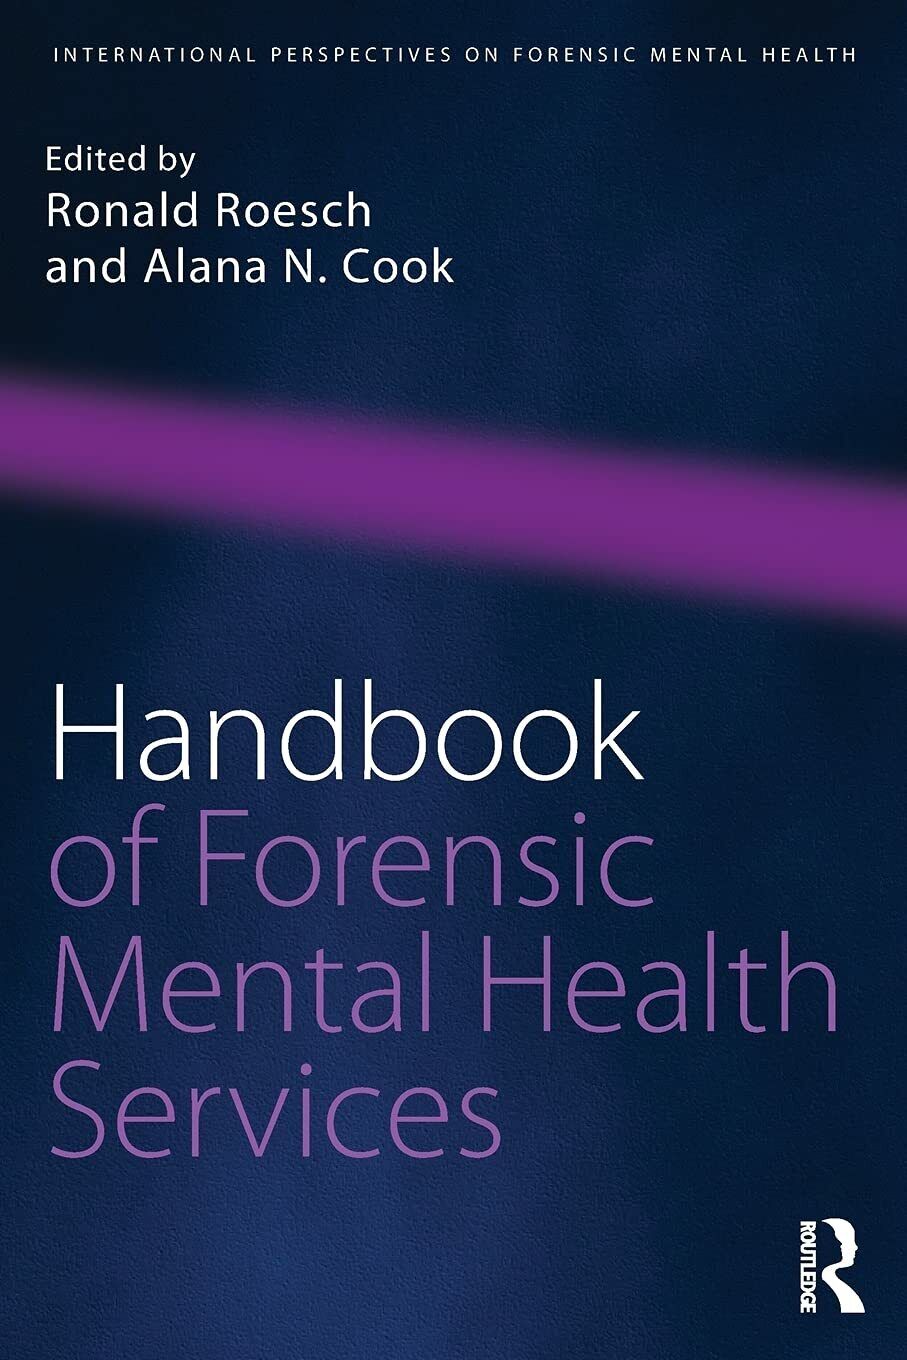 Handbook of Forensic Mental Health Services - Ronald Roesch - ROUTLEDGE, 2017